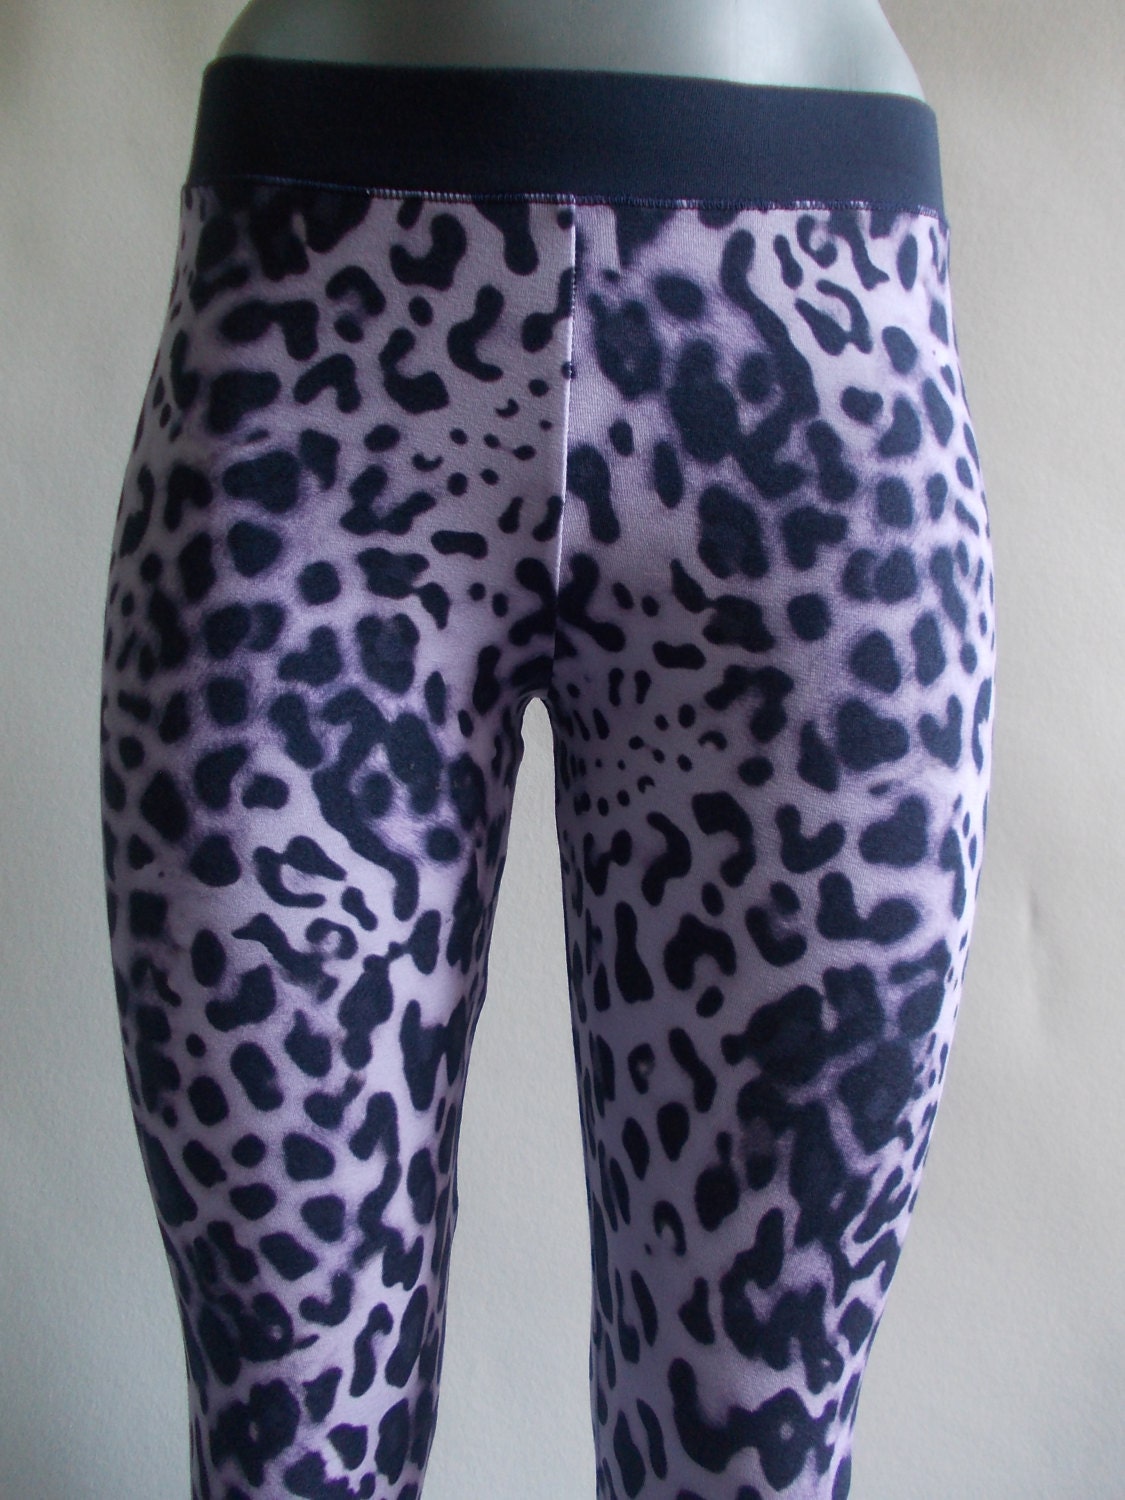 15 Minute Cheetah Print Workout Shorts for Gym